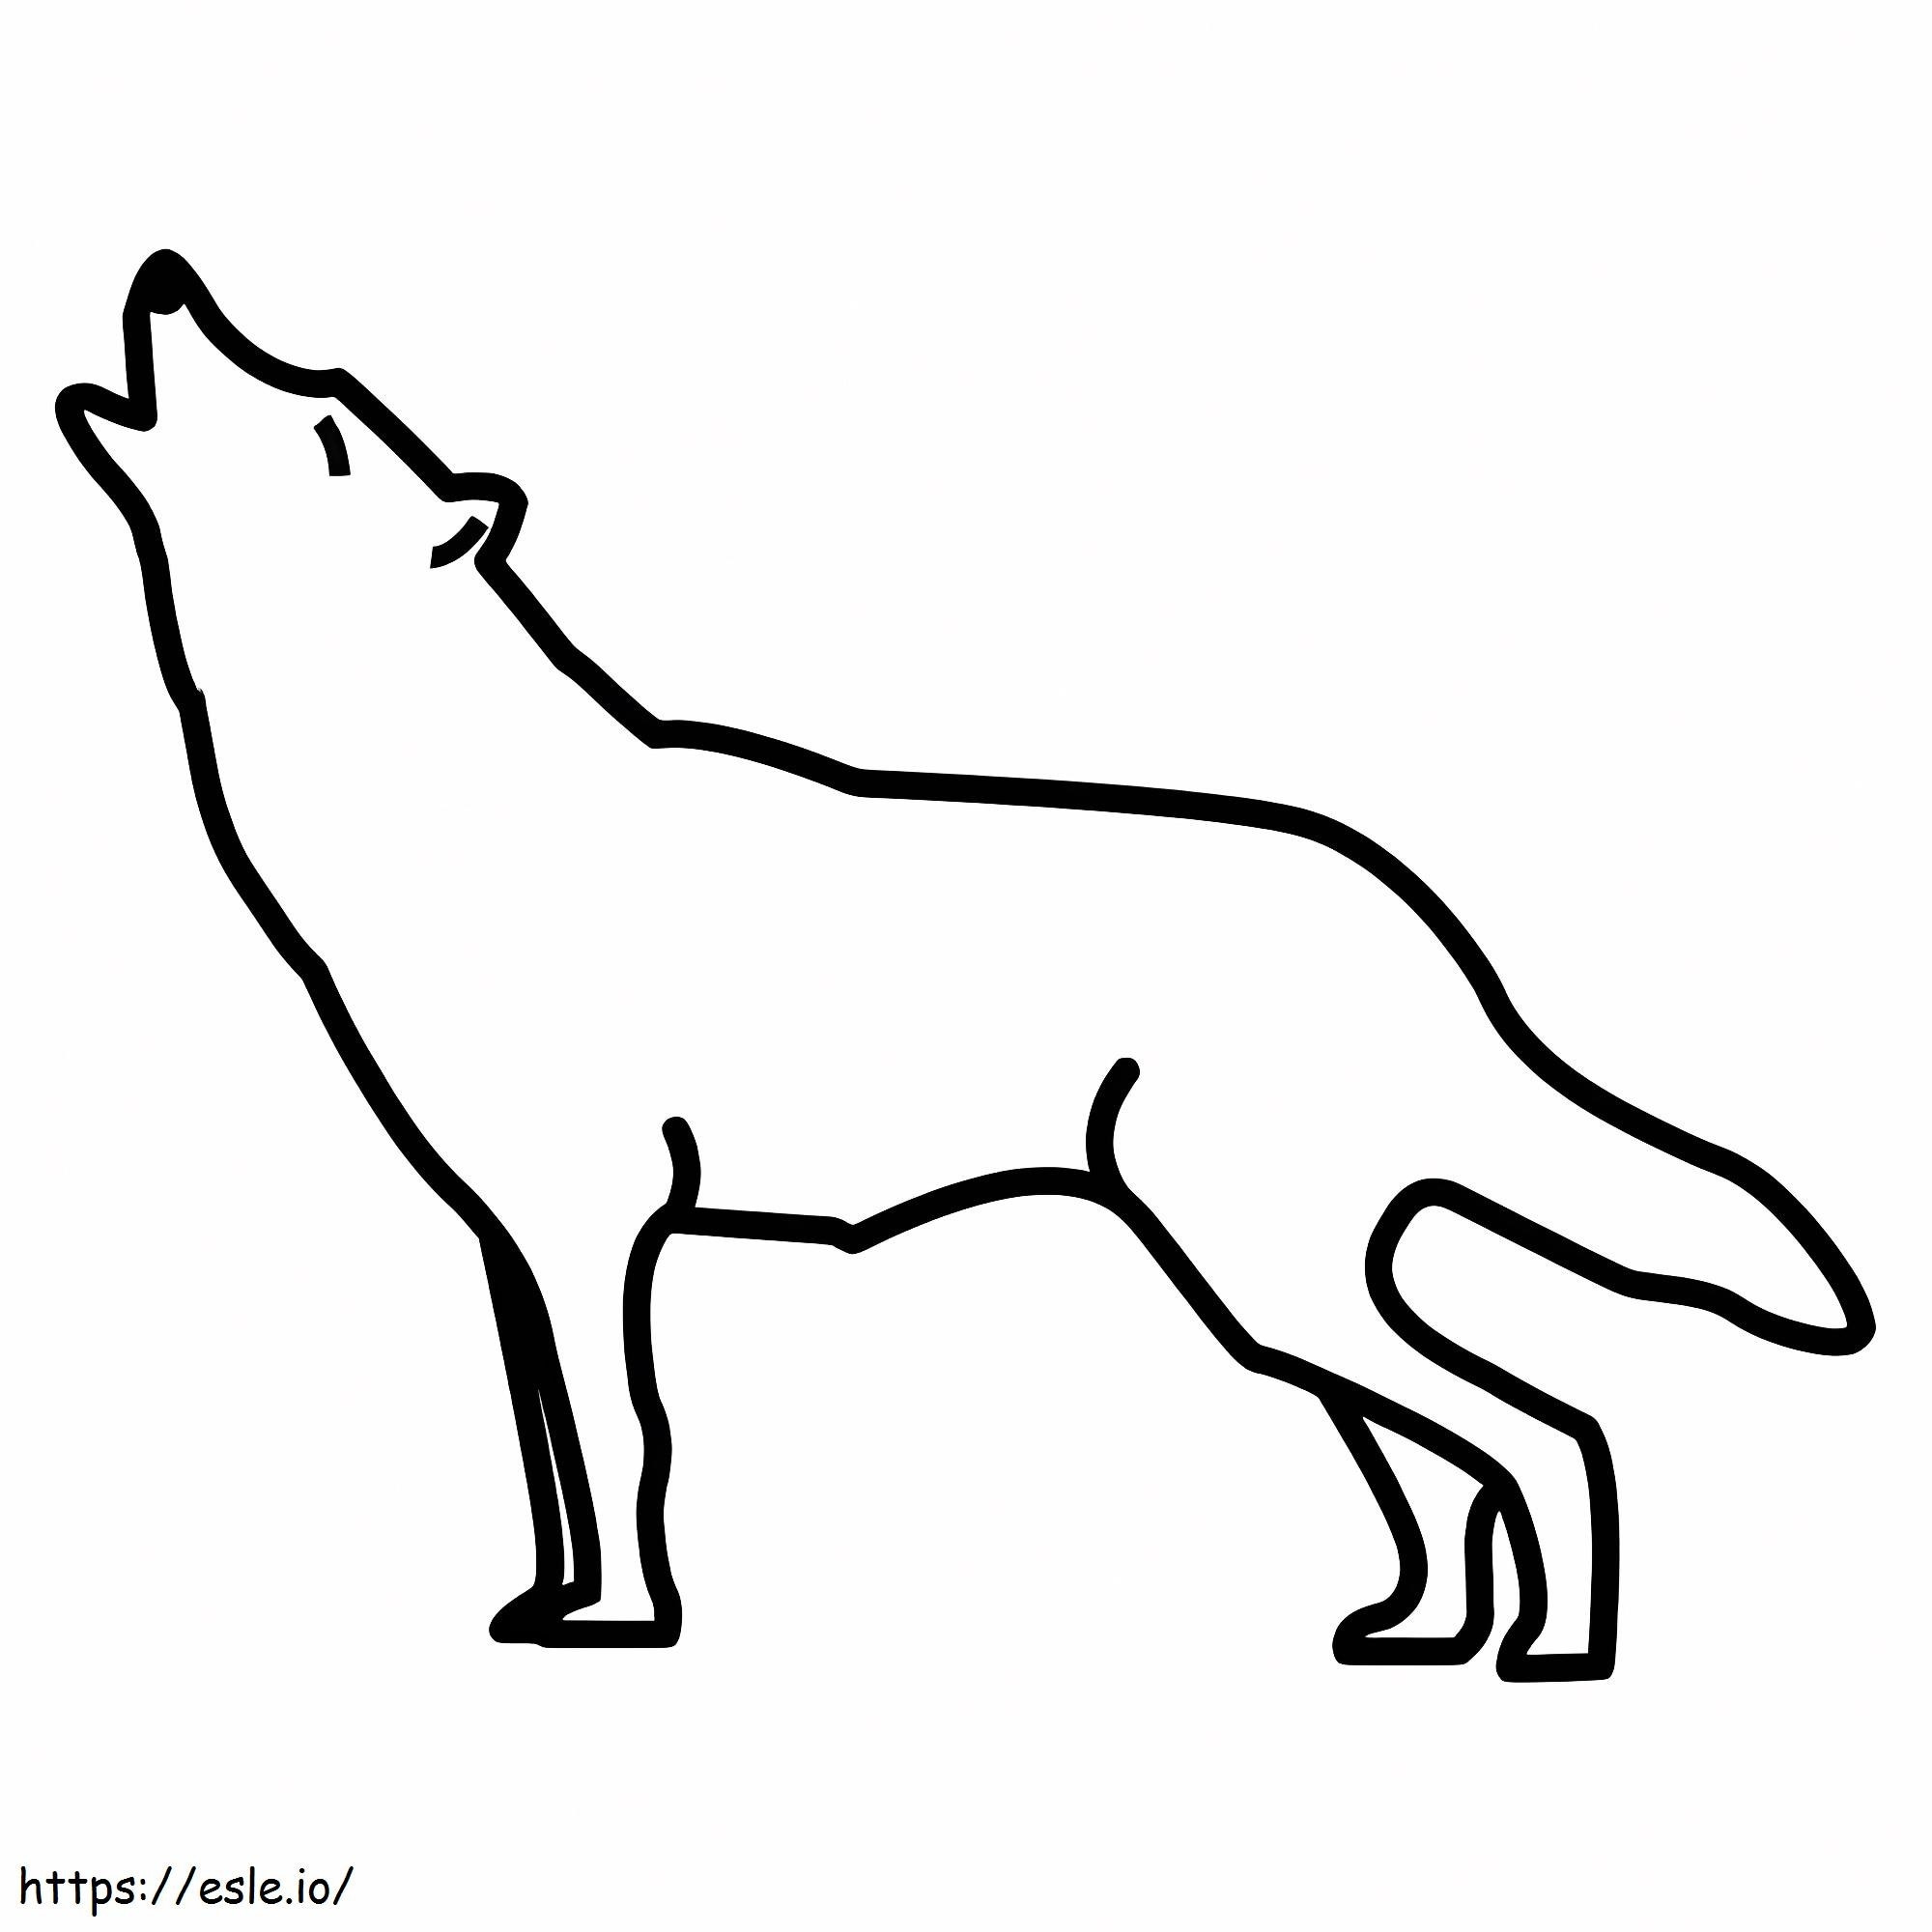 Wolf Outline coloring page